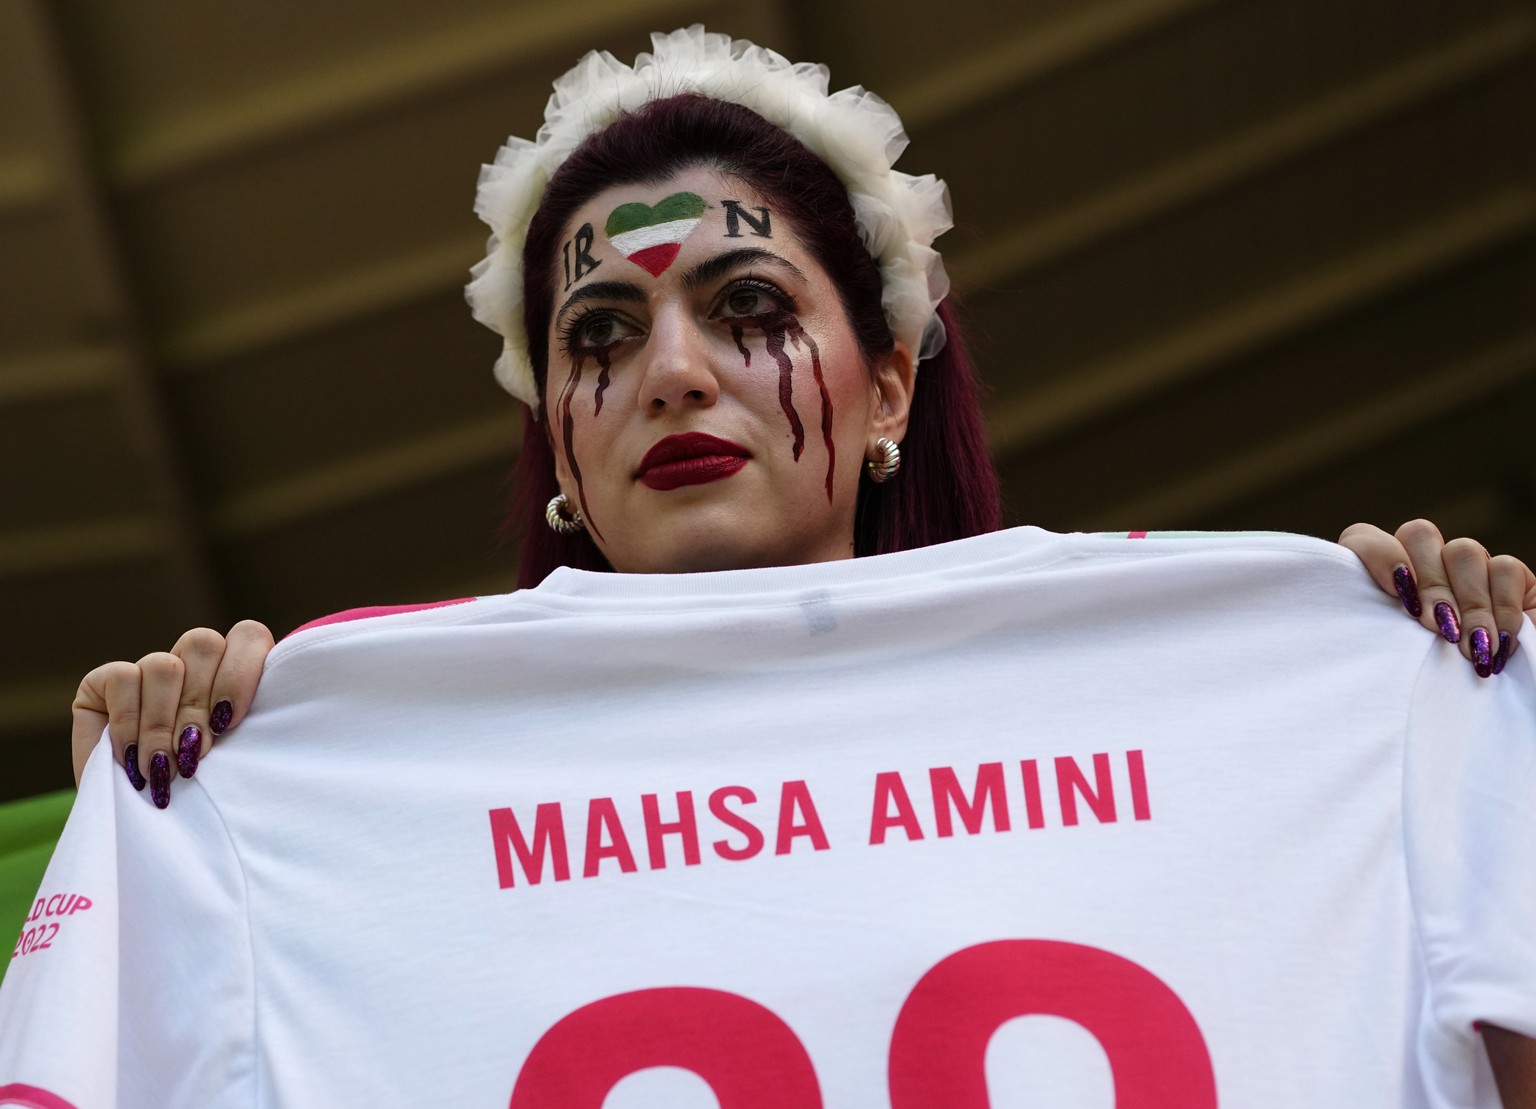 A fan painted her face holds a jersey with the name of Mahsa Amini, a woman who died while in police custody in Iran at the age of 22, ahead of the World Cup group B soccer match between Wales and Ira ...